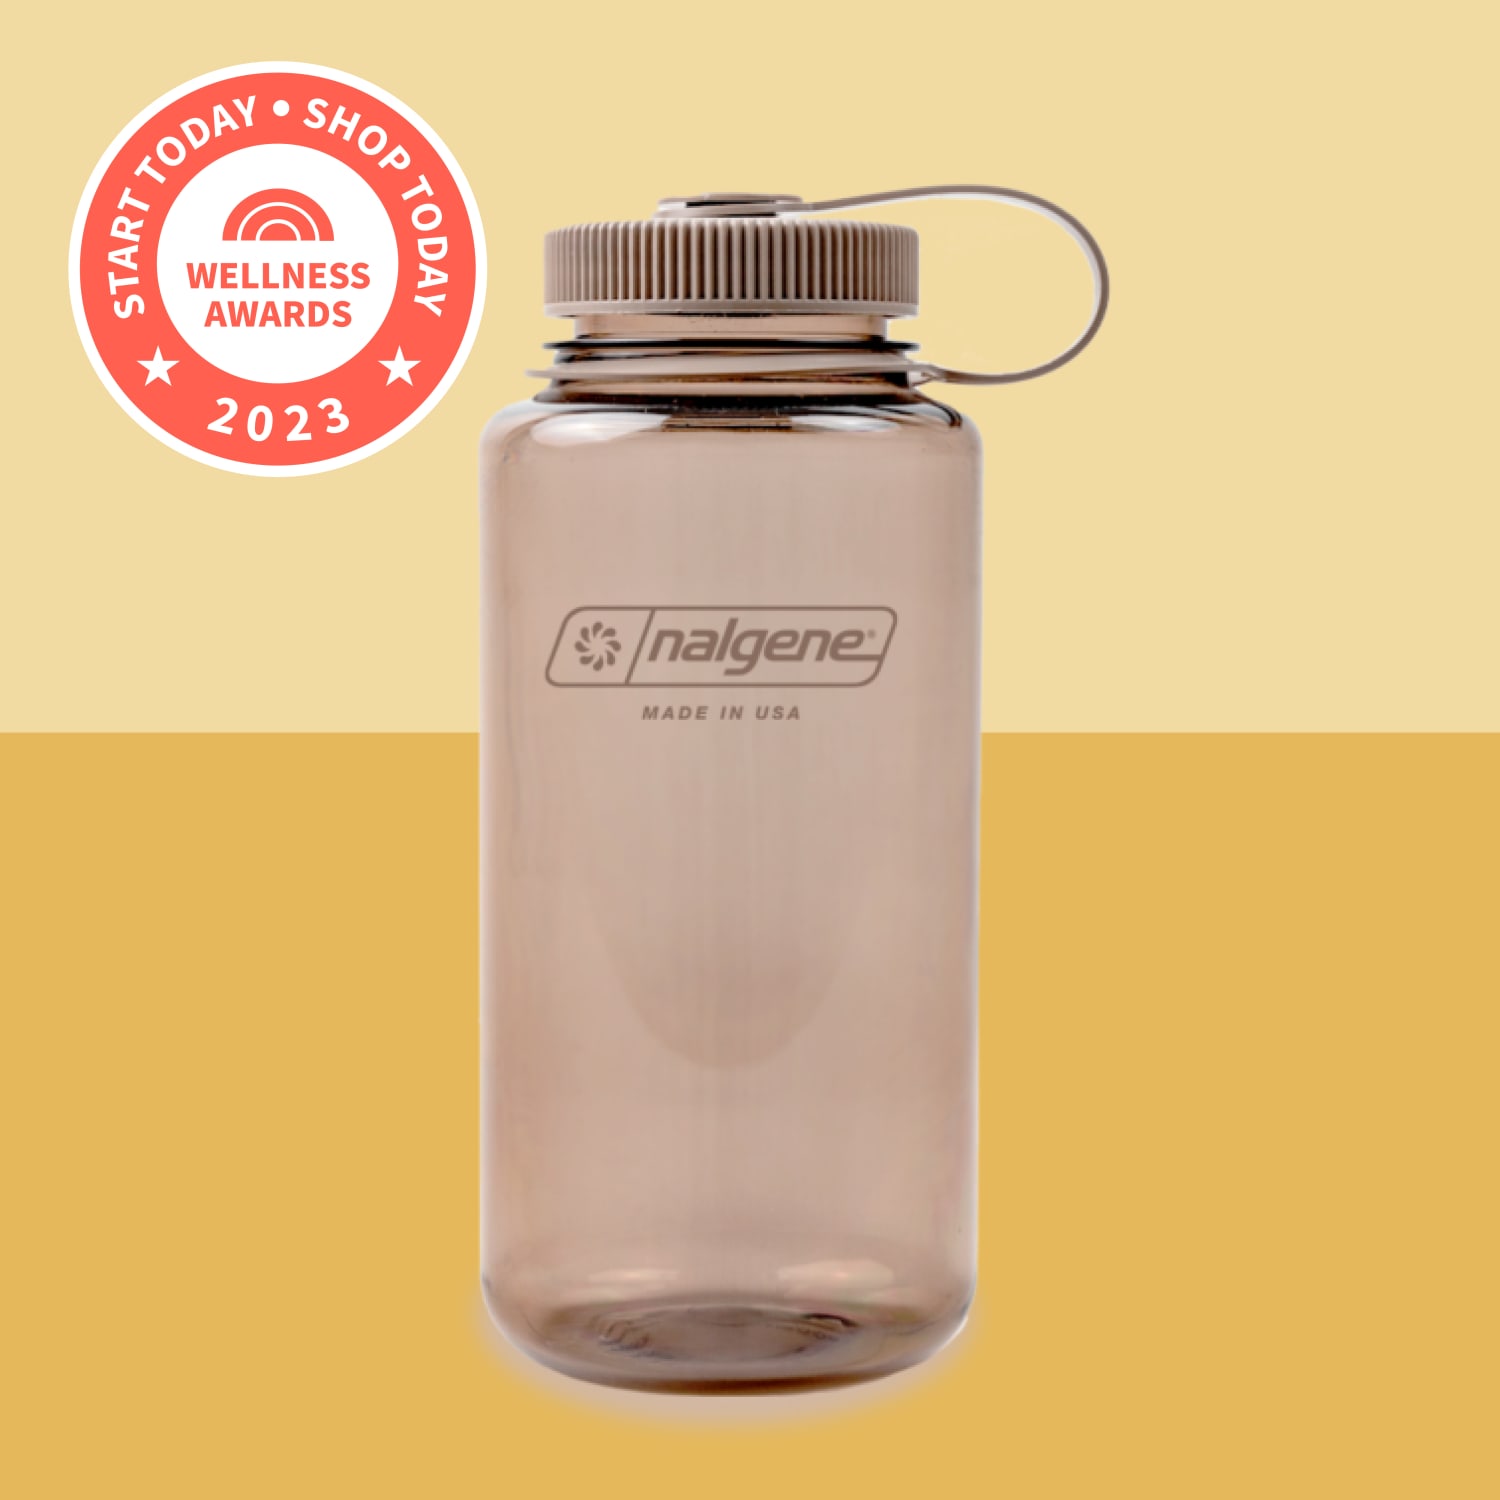 Ello Syndicate Glass Water Bottle with One-Touch Flip Lid BPA Free [price  for 1]